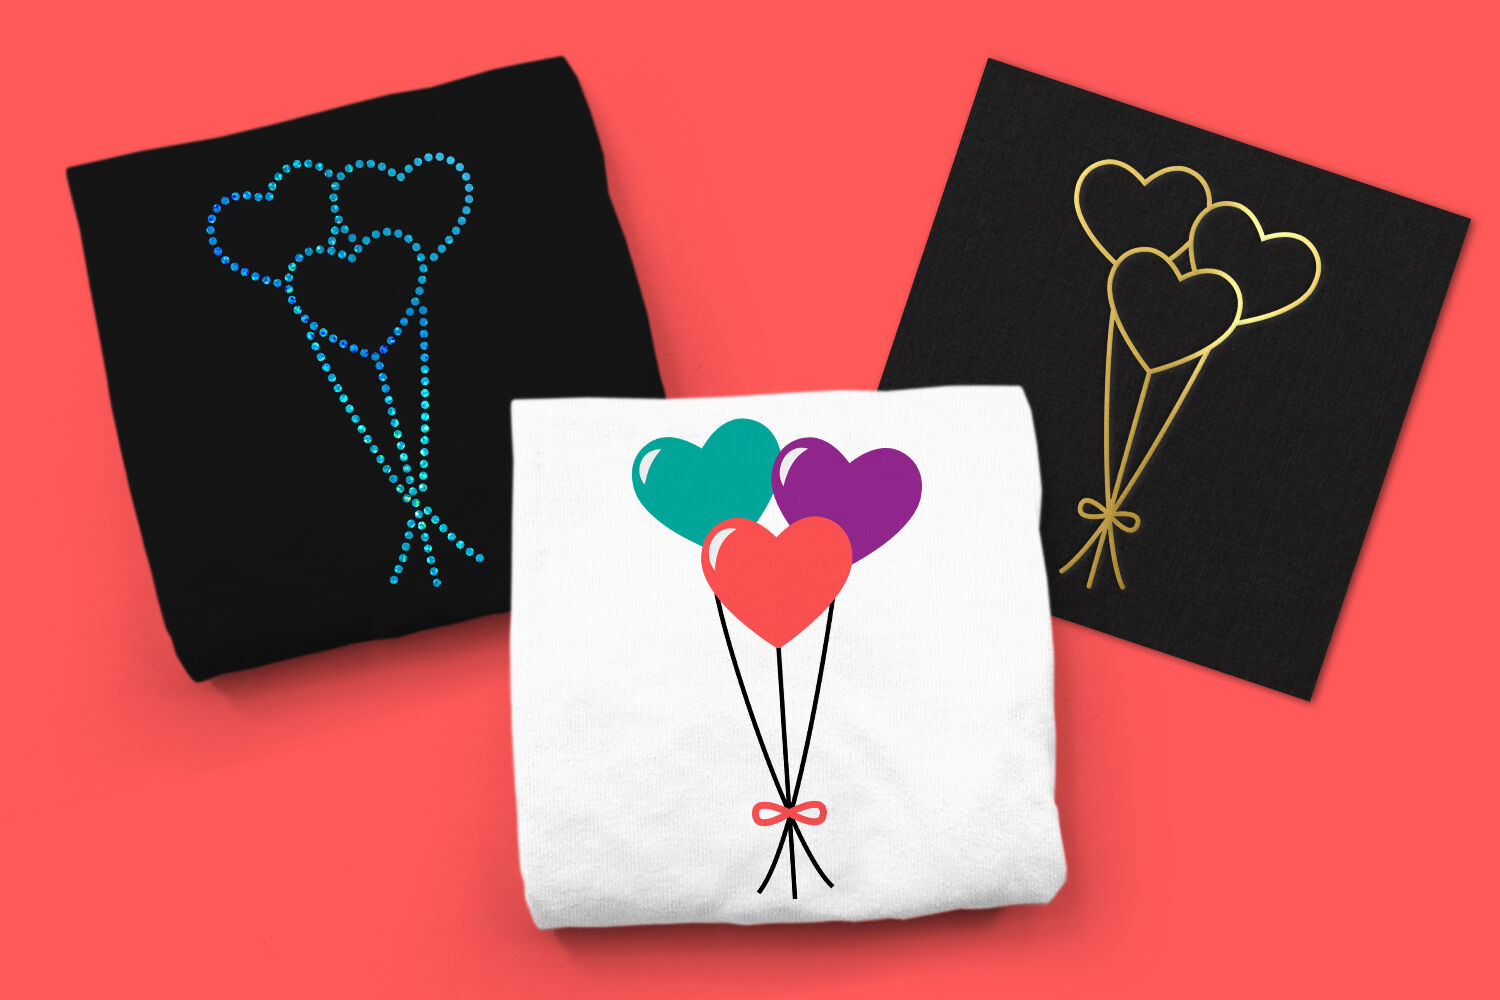 Heart Balloons Trio Inc. Sketch & Rhinestone, SVG, PNG, DXF, EPS By  Designed by Geeks